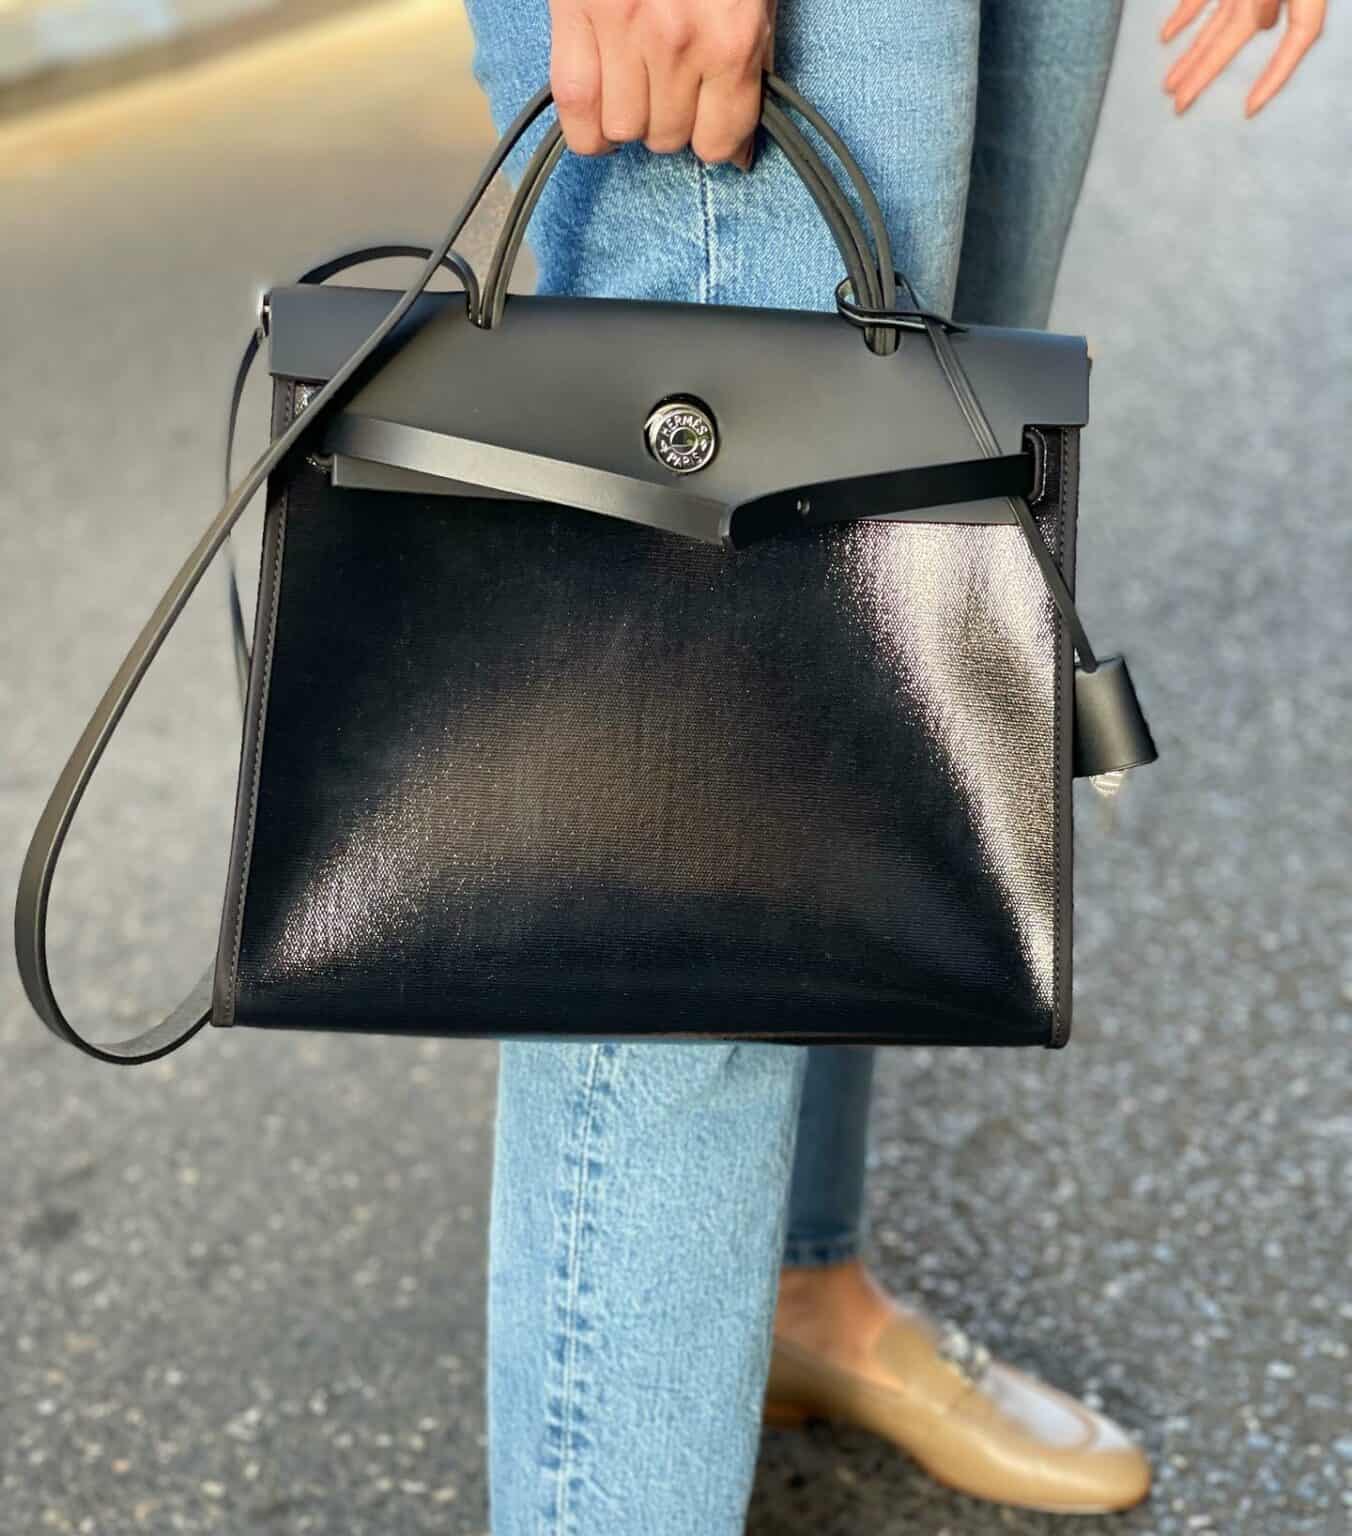 10 Facts About the Hermes Herbag • Petite in Paris